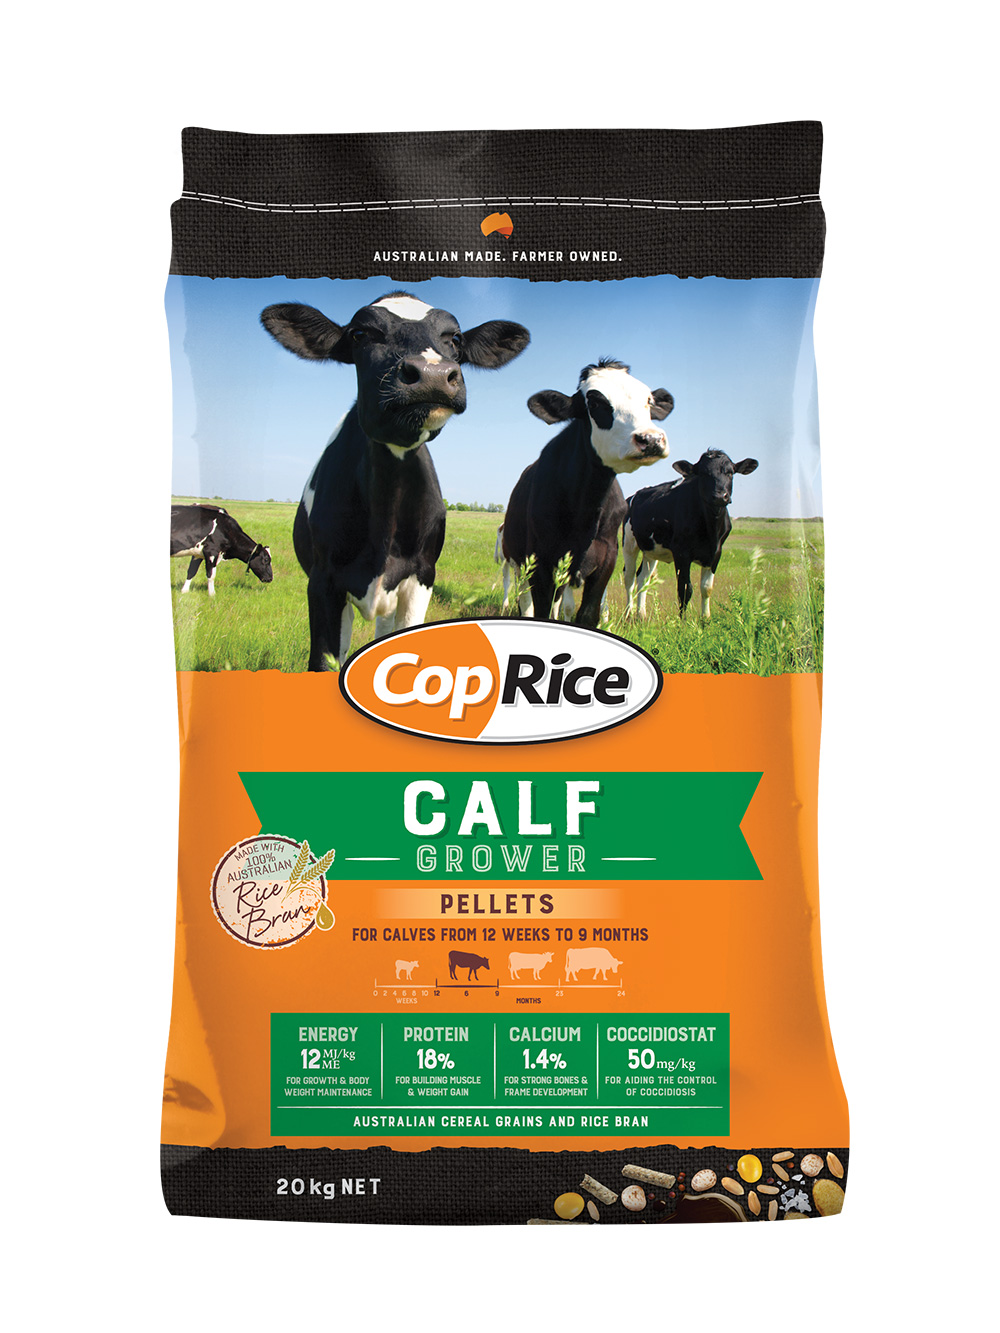 Coprice 20kg Calf Grower